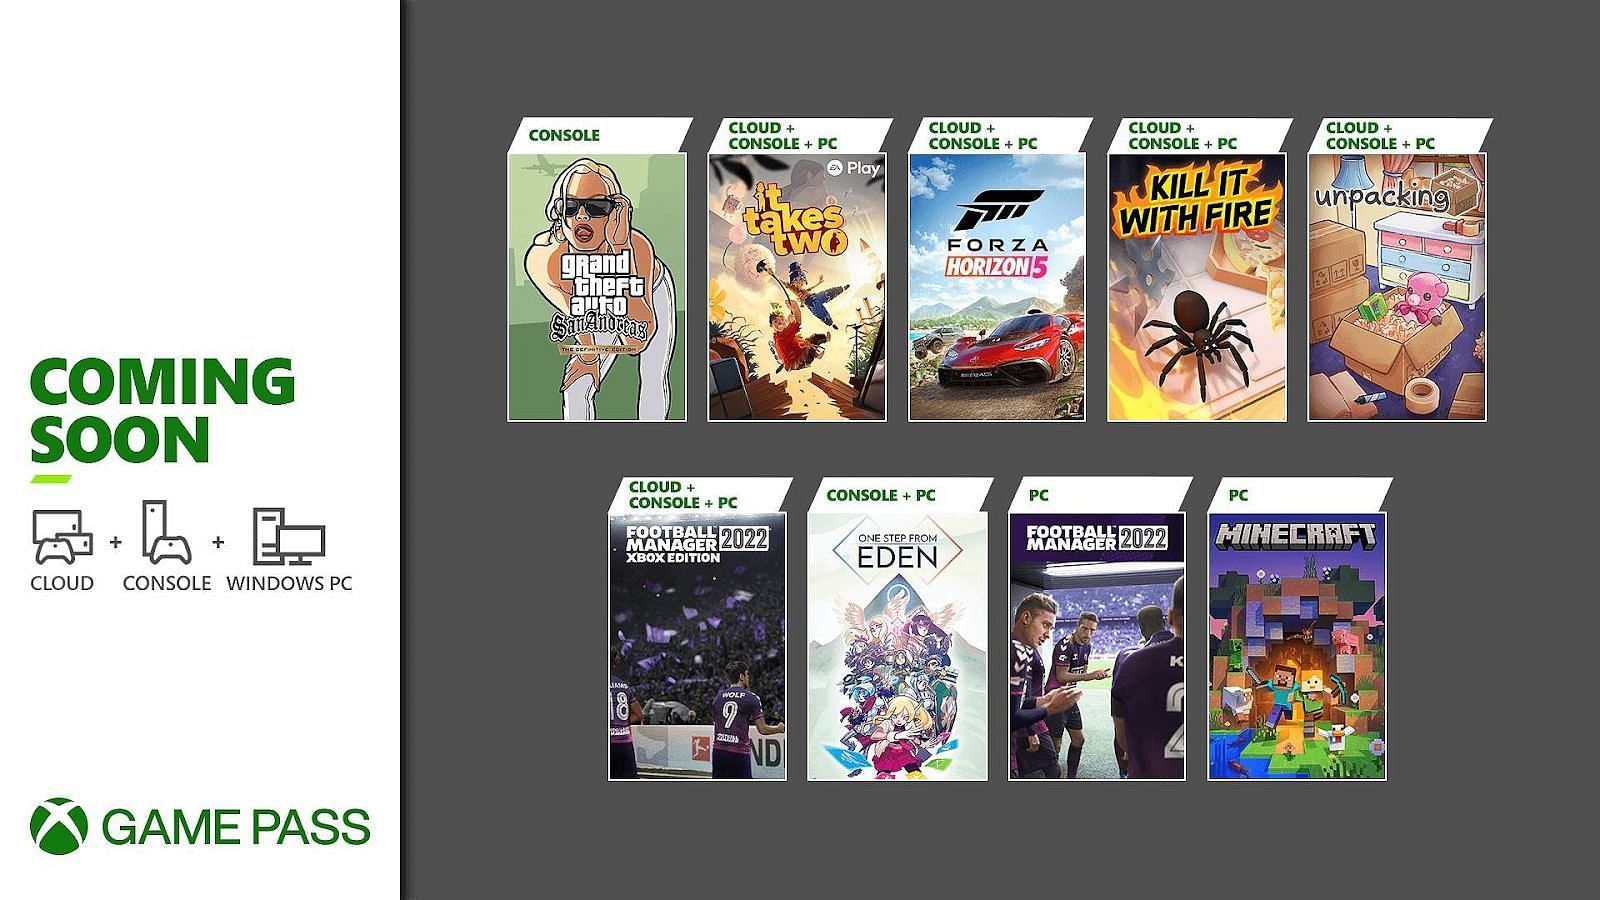 Xbox Game Pass brings GTA San Andreas Definitive Edition, It Takes Two, and Forza Horizon 5 (Image by Xbox)